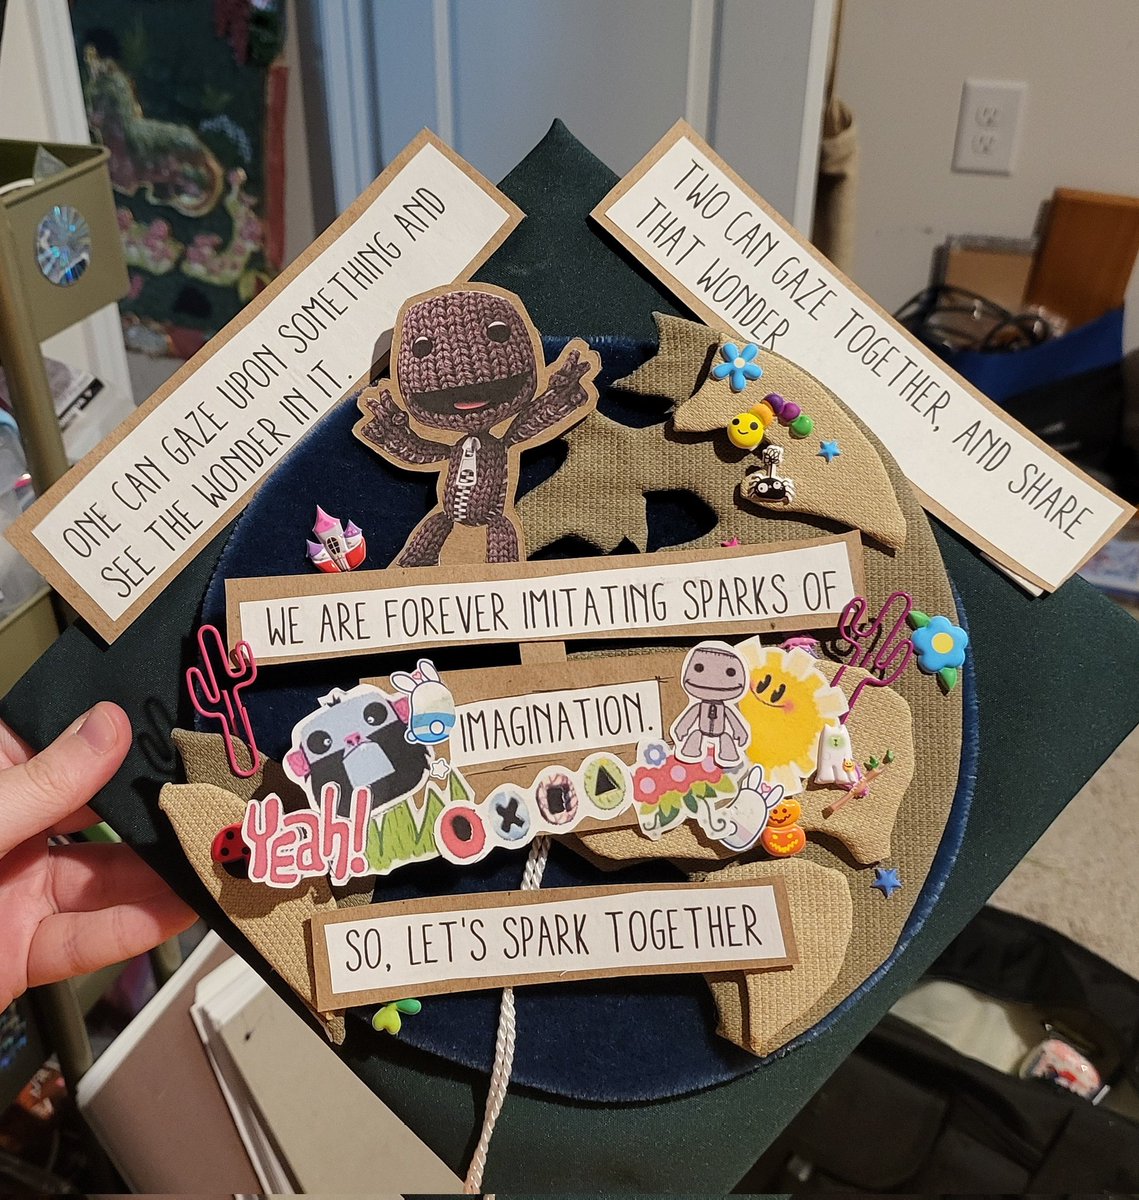 Made a very last minute littlebigplanet themed graduation cap for my graduation today :)